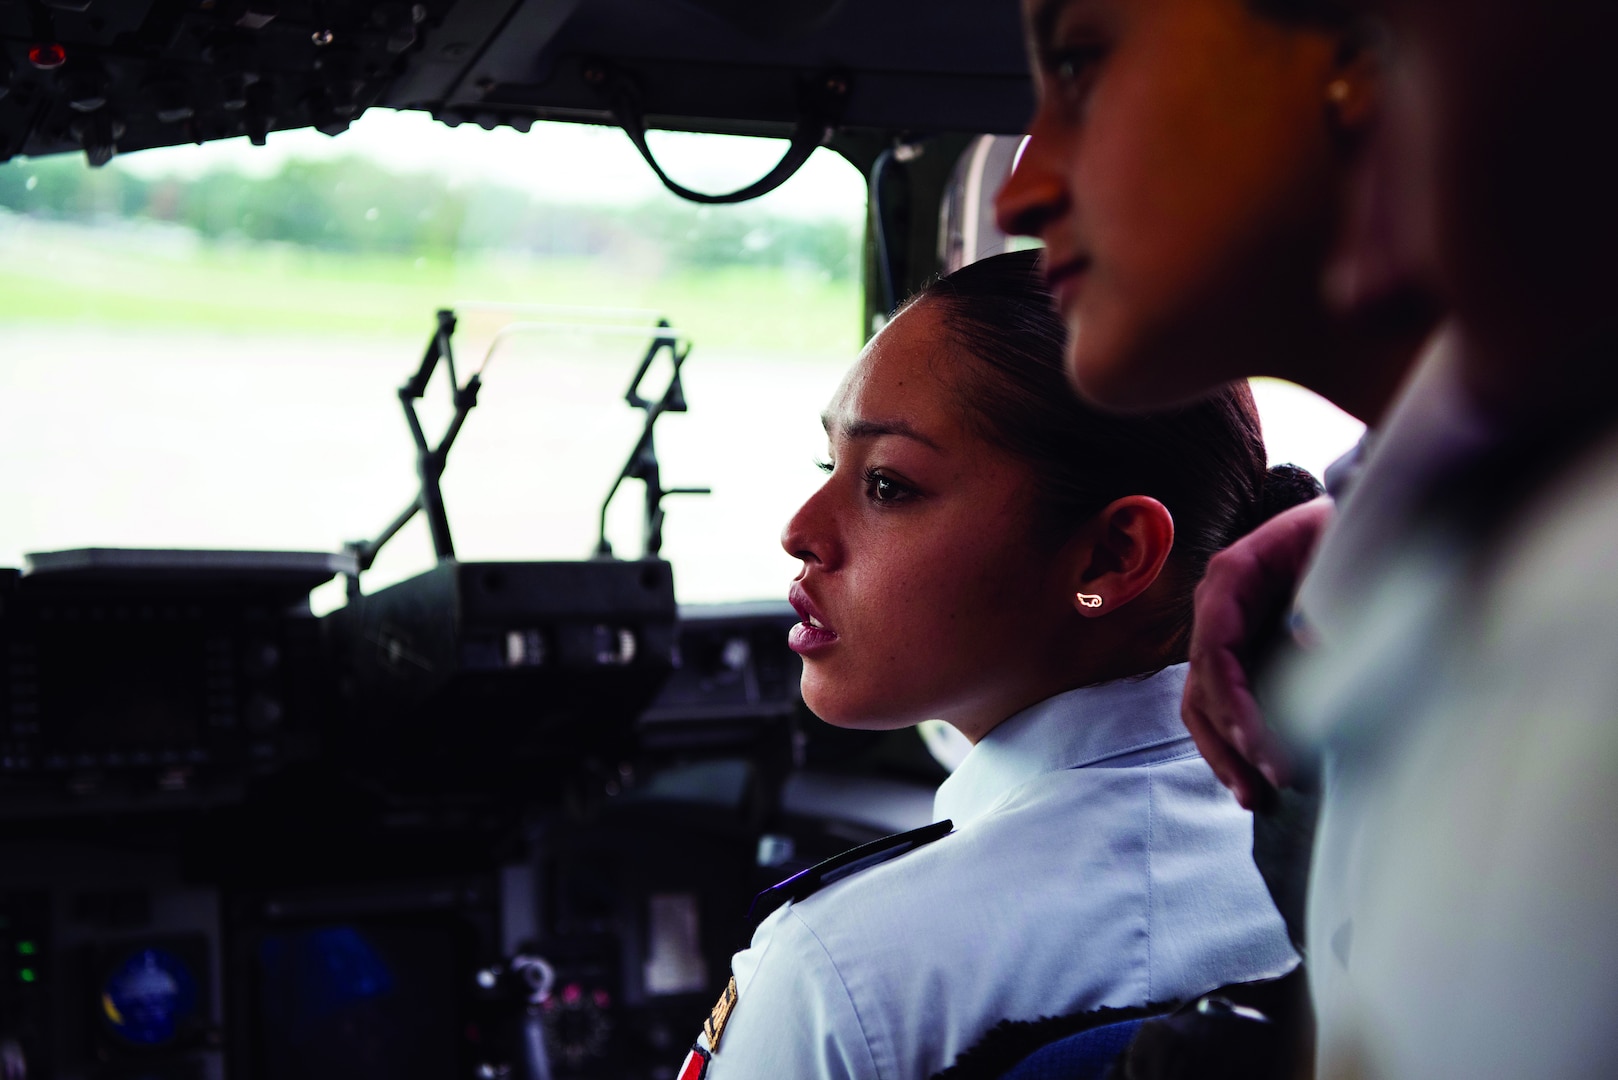 Karina Chavez Munoz, a cadet from the Mexican Air Force Academy, sits in the copilot seat on a C-17 Globemaster III Oct. 15, 2018, at Dover Air Force Base, Del. During their tour of Dover the cadets had lunch at Patterson Dining Facility and got to experience the C-17 and C-5M Super Galaxy up close. (U.S. Air Force photo by Airman 1st Class Zoe M. Wockenfuss181015-F-OK627-1086